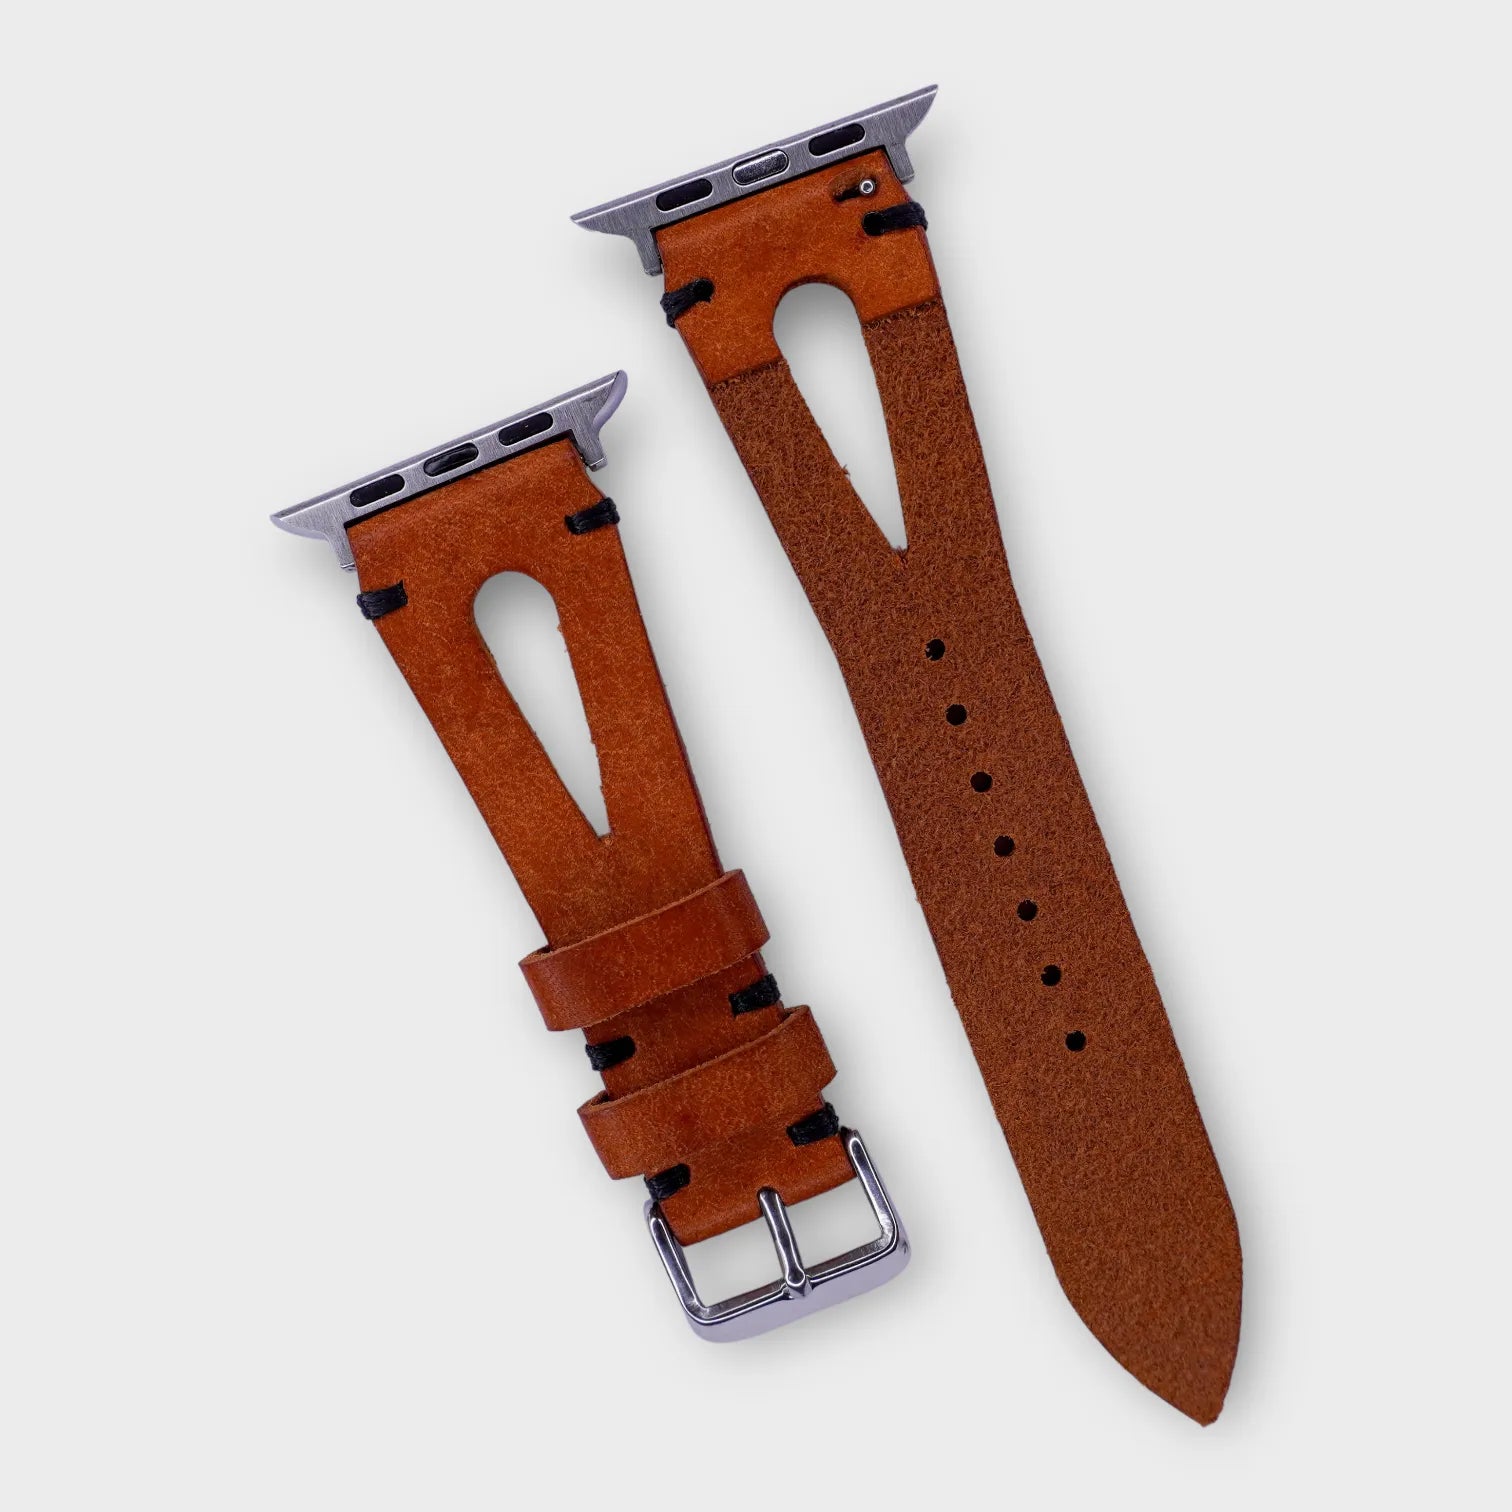 Durable leather watch straps crafted from artisan light brown Pueblo leather, combining style and sustainability.